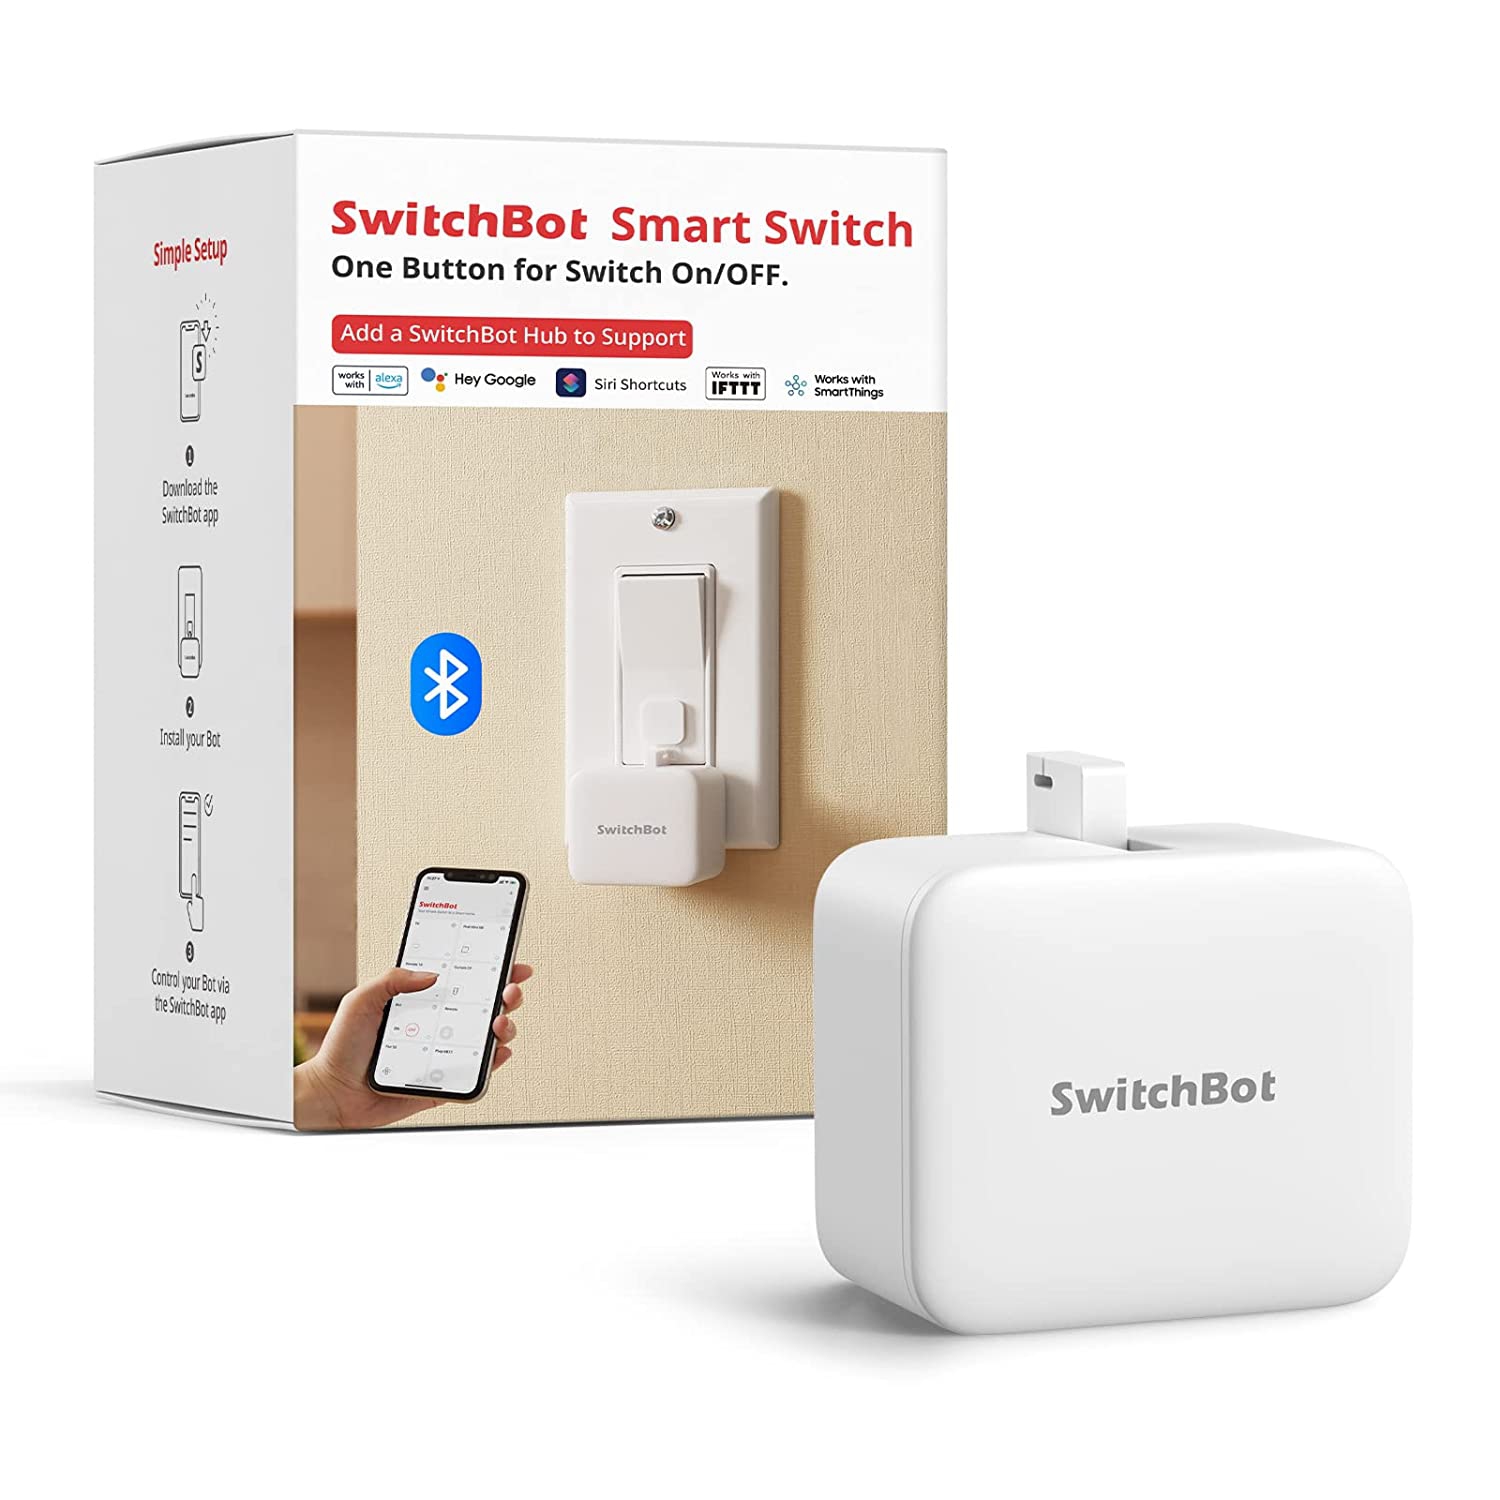 SwitchBot Bot | Smart Light Switch Button Pusher - No Wiring, Wireless App or Timer Control, Add SwitchBot Hub Mini to Make it Compatible with Alexa, Google Home, IFTTT, White